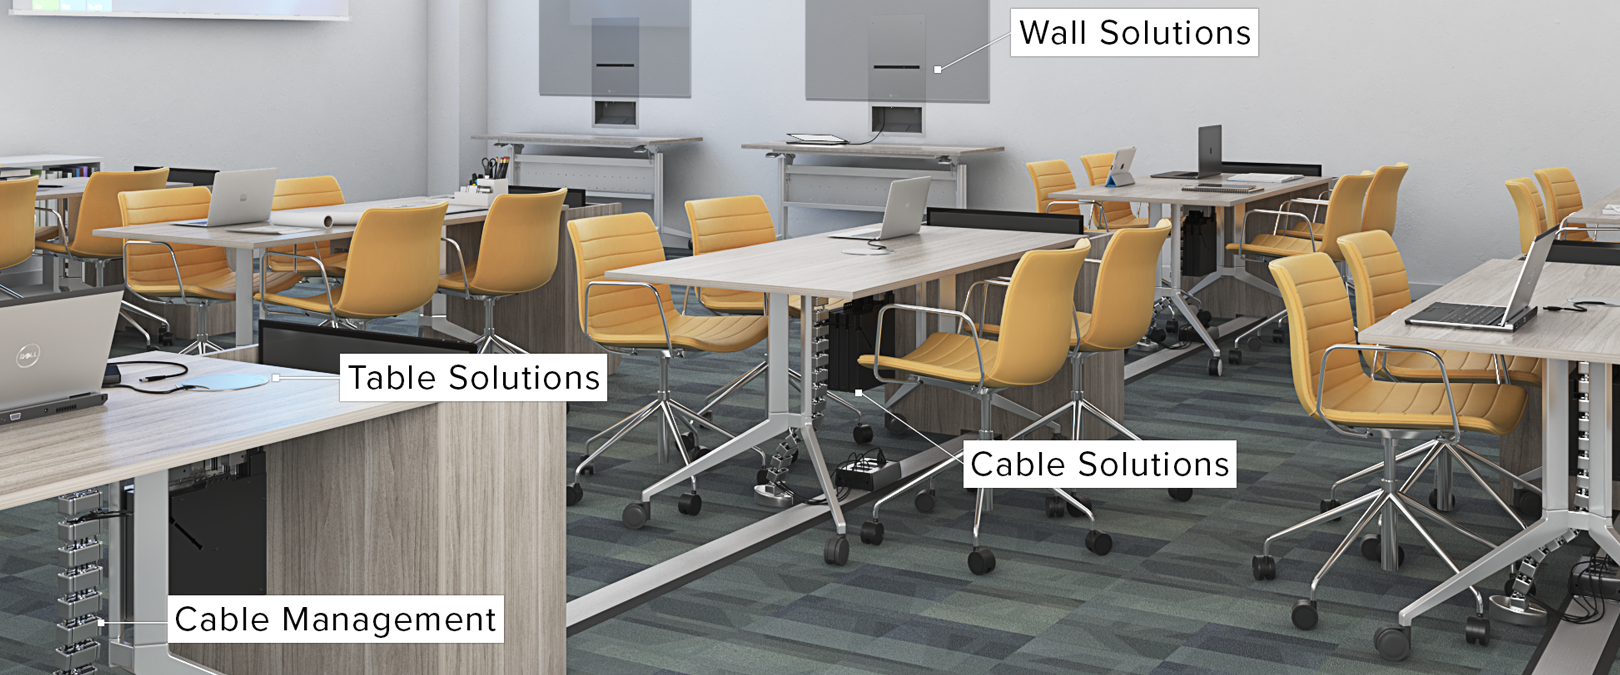 Classroom-Solutions-1620x675 6 Points to Consider When Designing Group Work/Collaboration Spaces in K-12 - FSR, Inc. - AV Connectivity Solutions